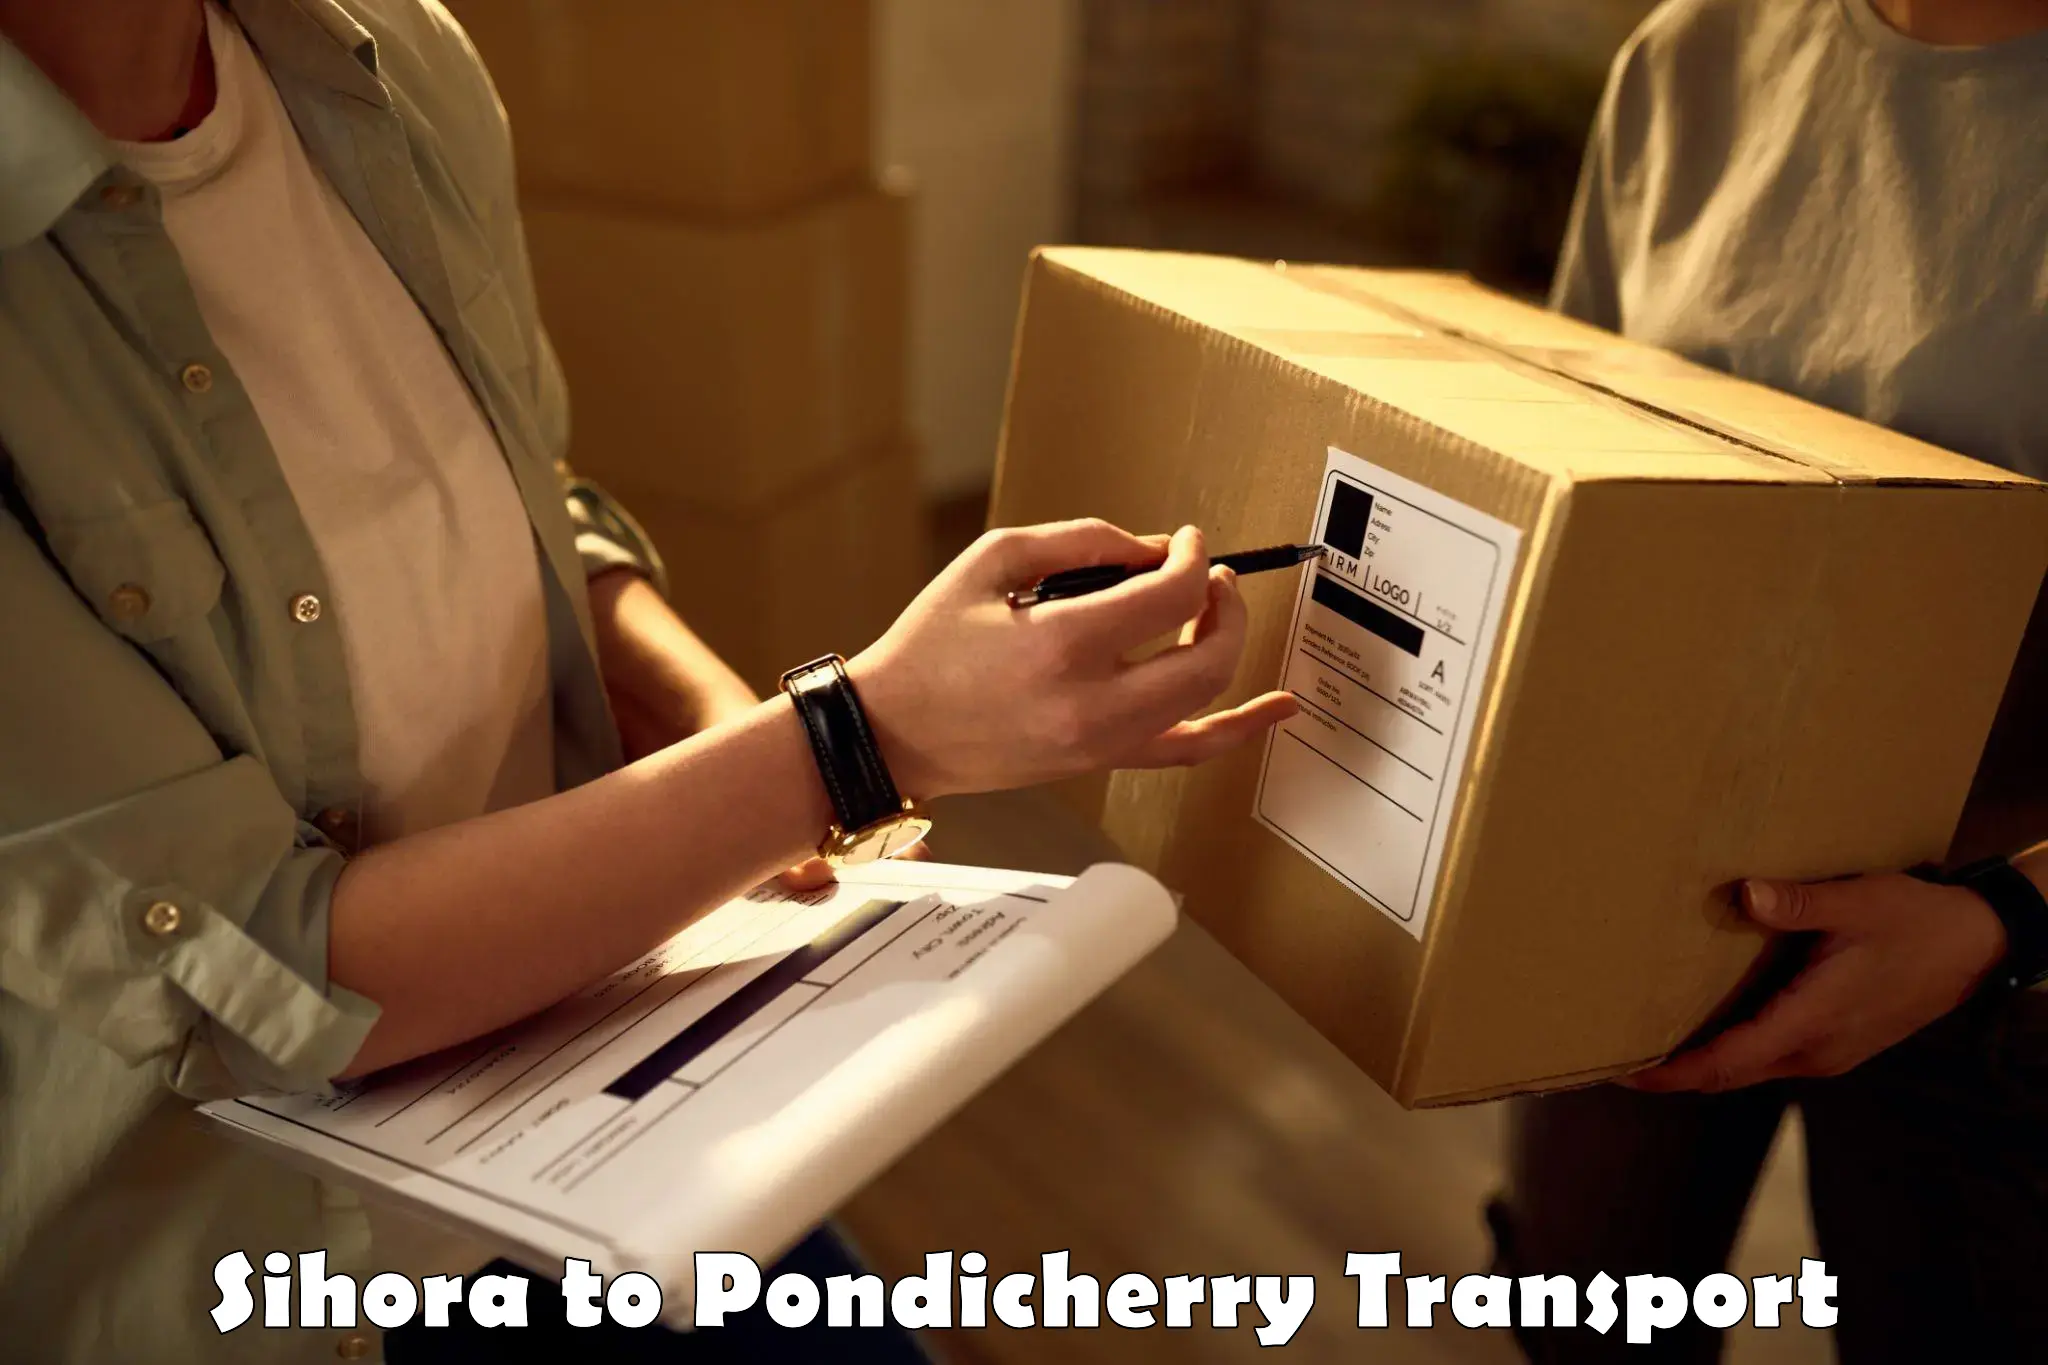 Transport shared services Sihora to Pondicherry